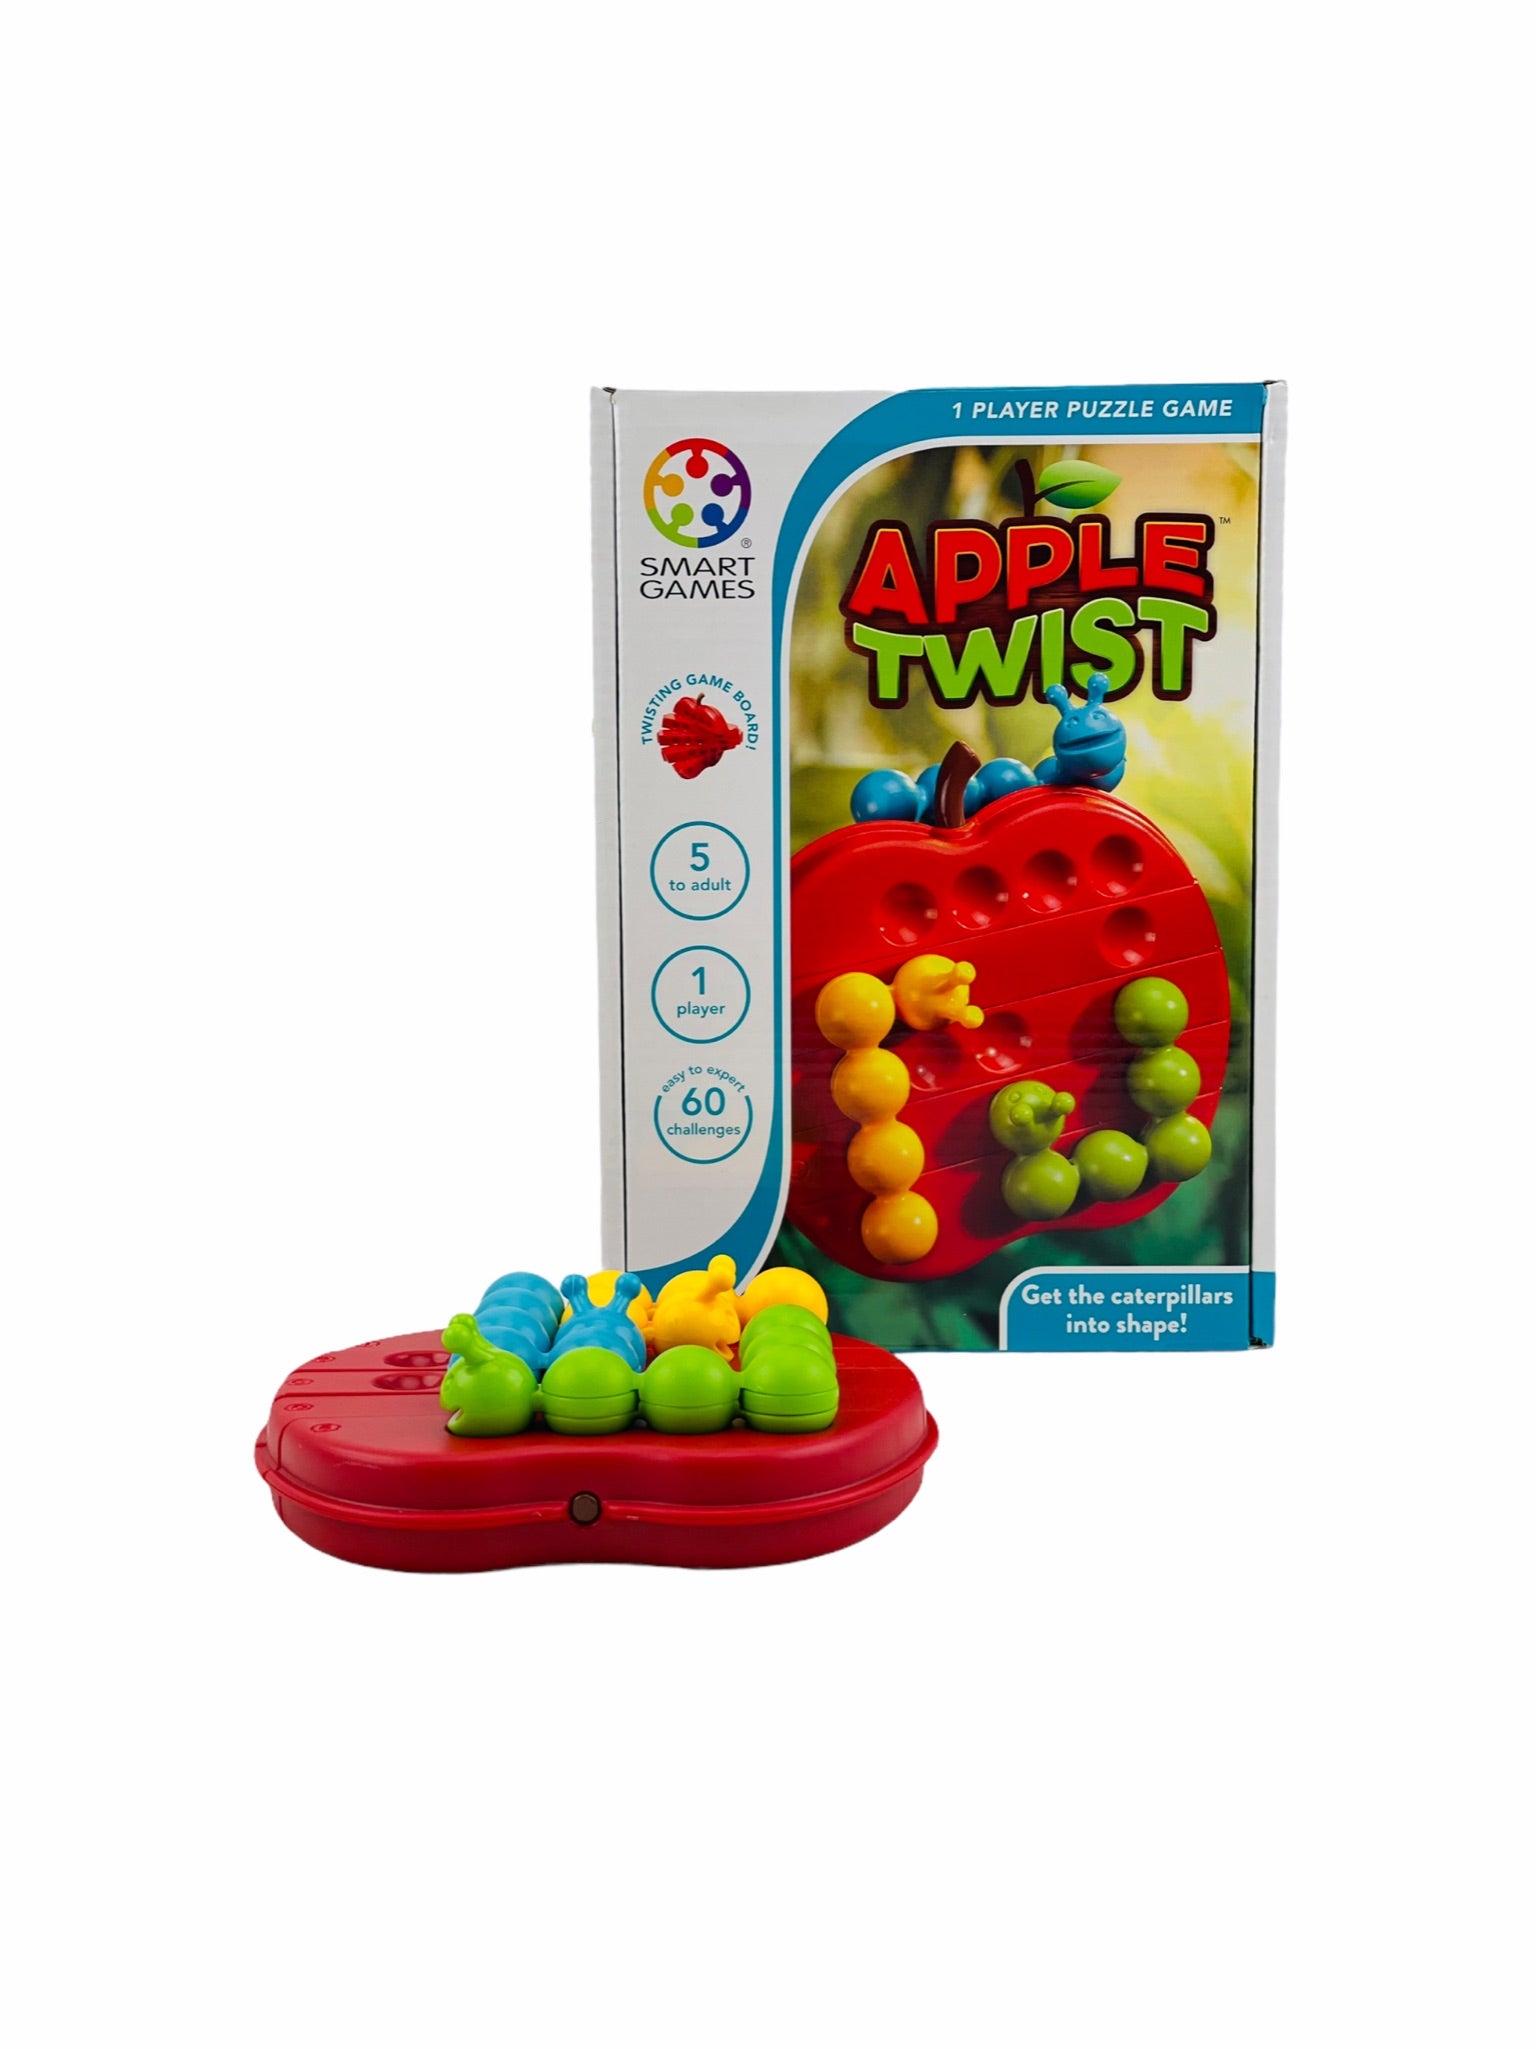 Smart Games Apple Twist with apple and caterpillars displayed in front of box